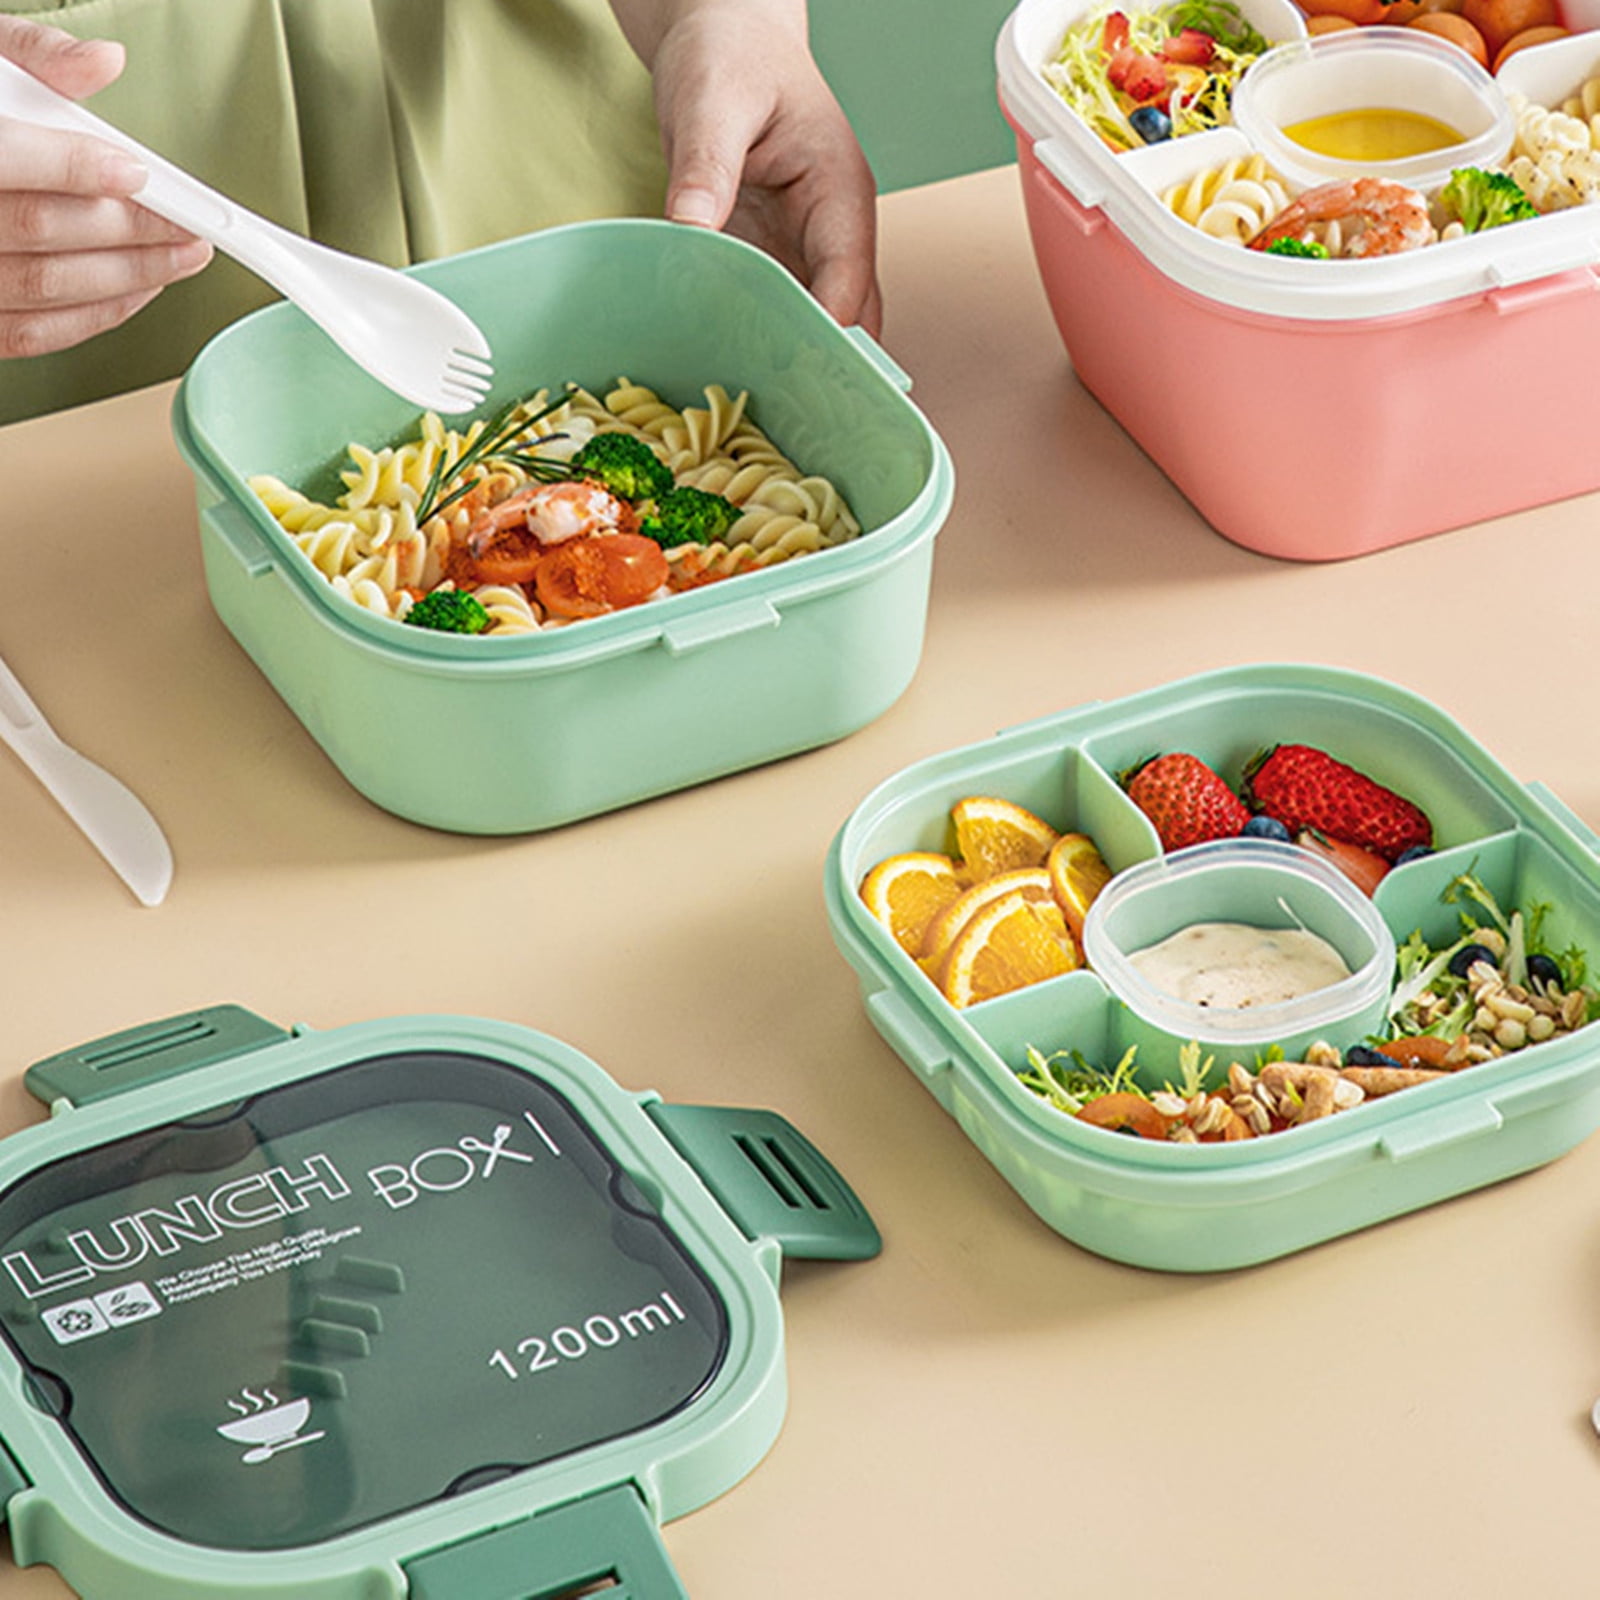 Feltree Home Essential Product Lunch Box Kids,Bento Box Adult Lunch Box, Lunch Containers For Adults/Kids/Toddler,1200ML-5 Compartment Bento Lunch  Box,Built-In Reusable Spoon & BPA-Free 